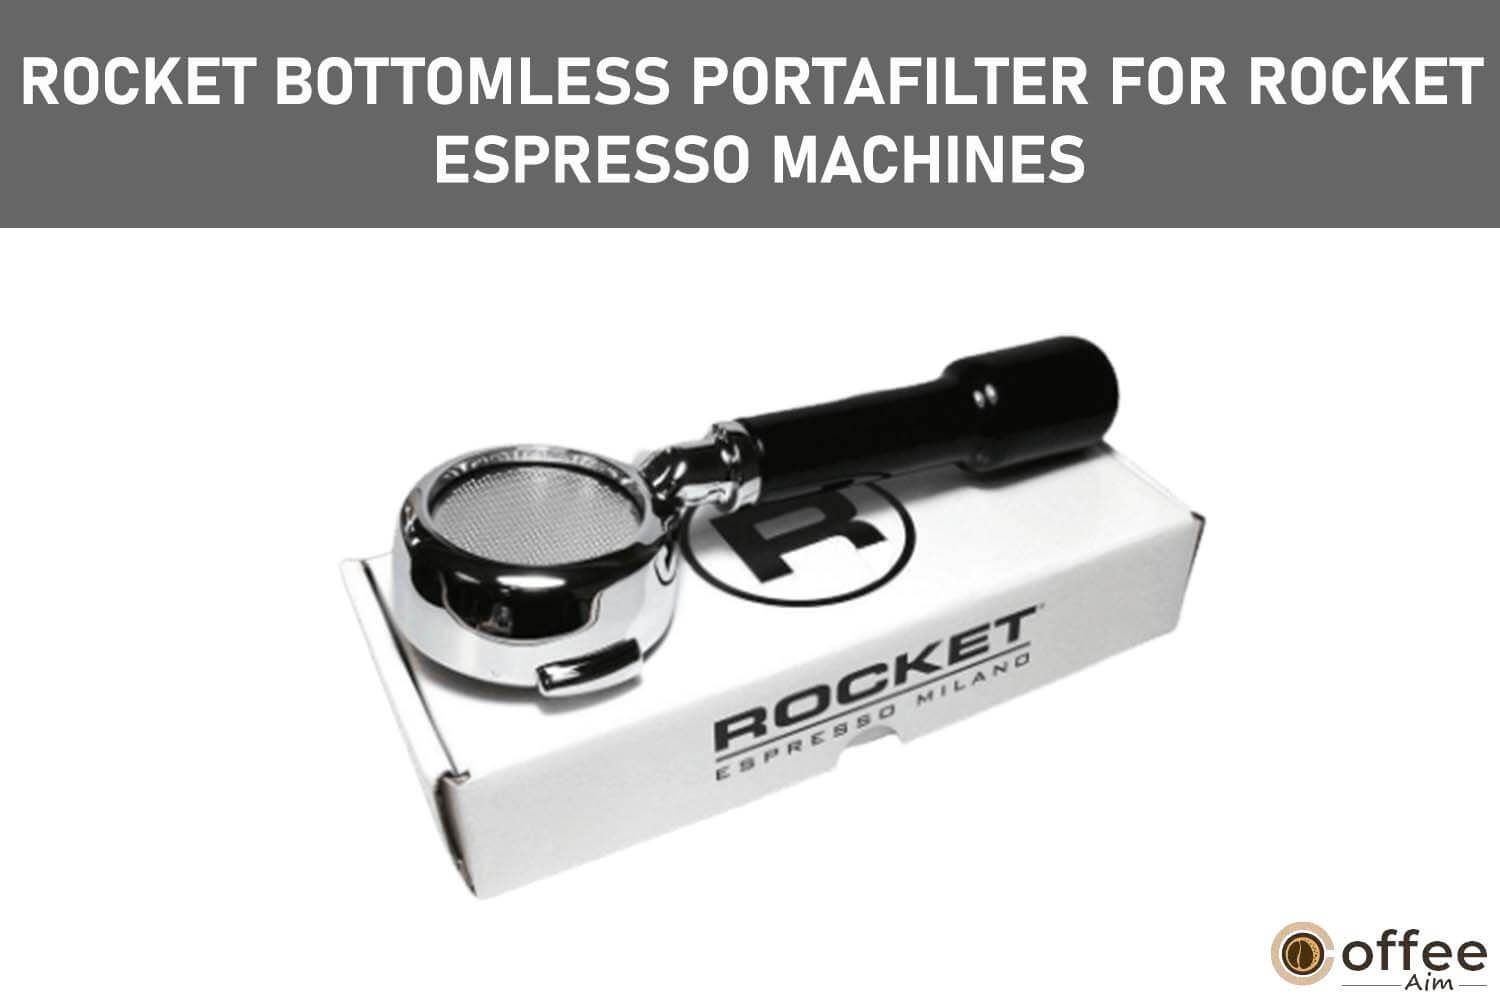 Featured image for the article "Rocket Bottomless Portafilter for Rocket Espresso Machines"